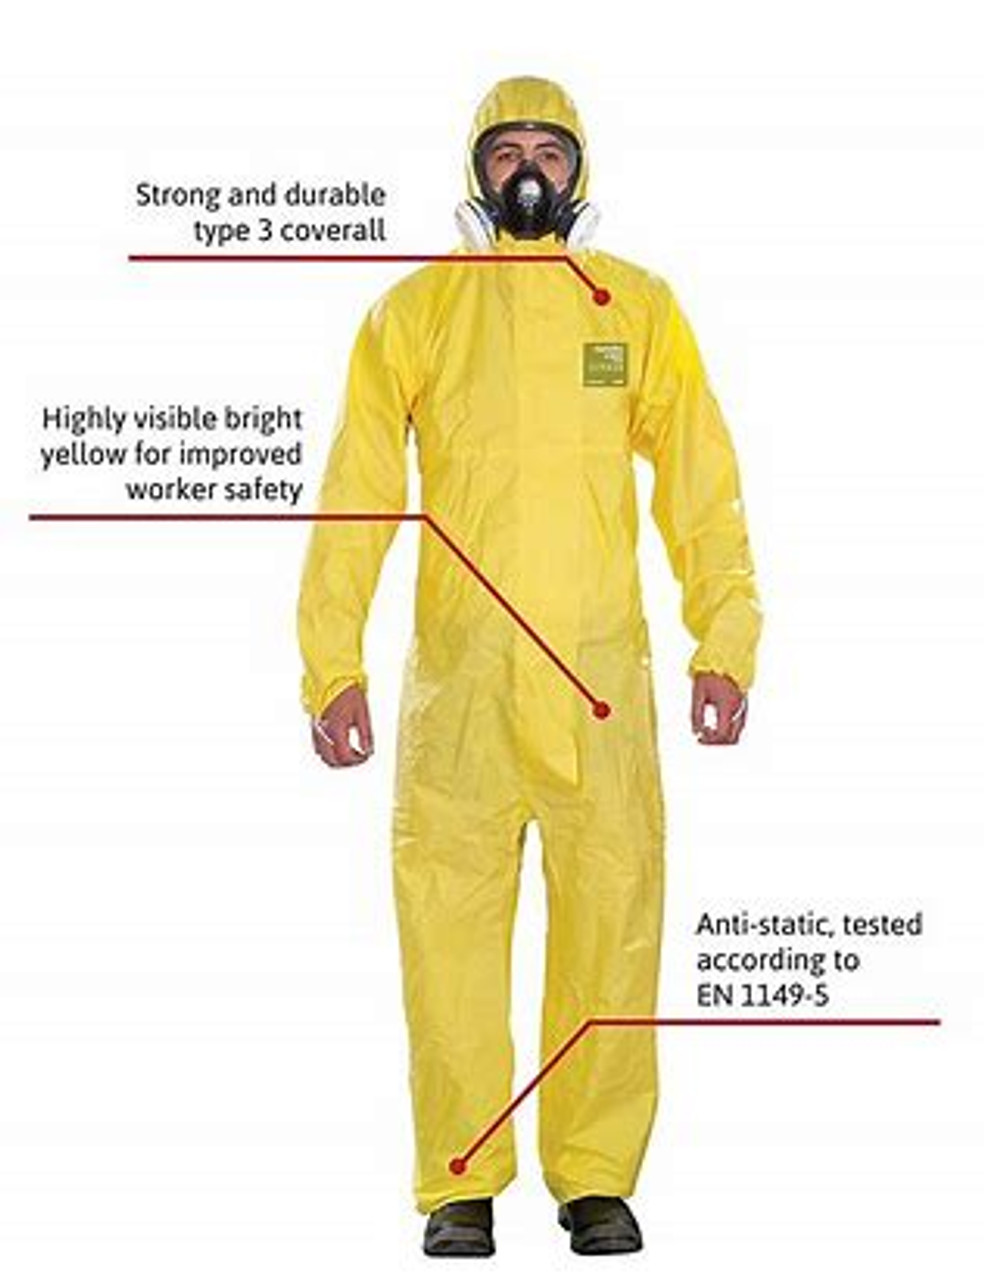 AlphaTec® 2300 PLUS Stitched & Taped Hooded Coveralls | ALKALI SCIENTIFIC